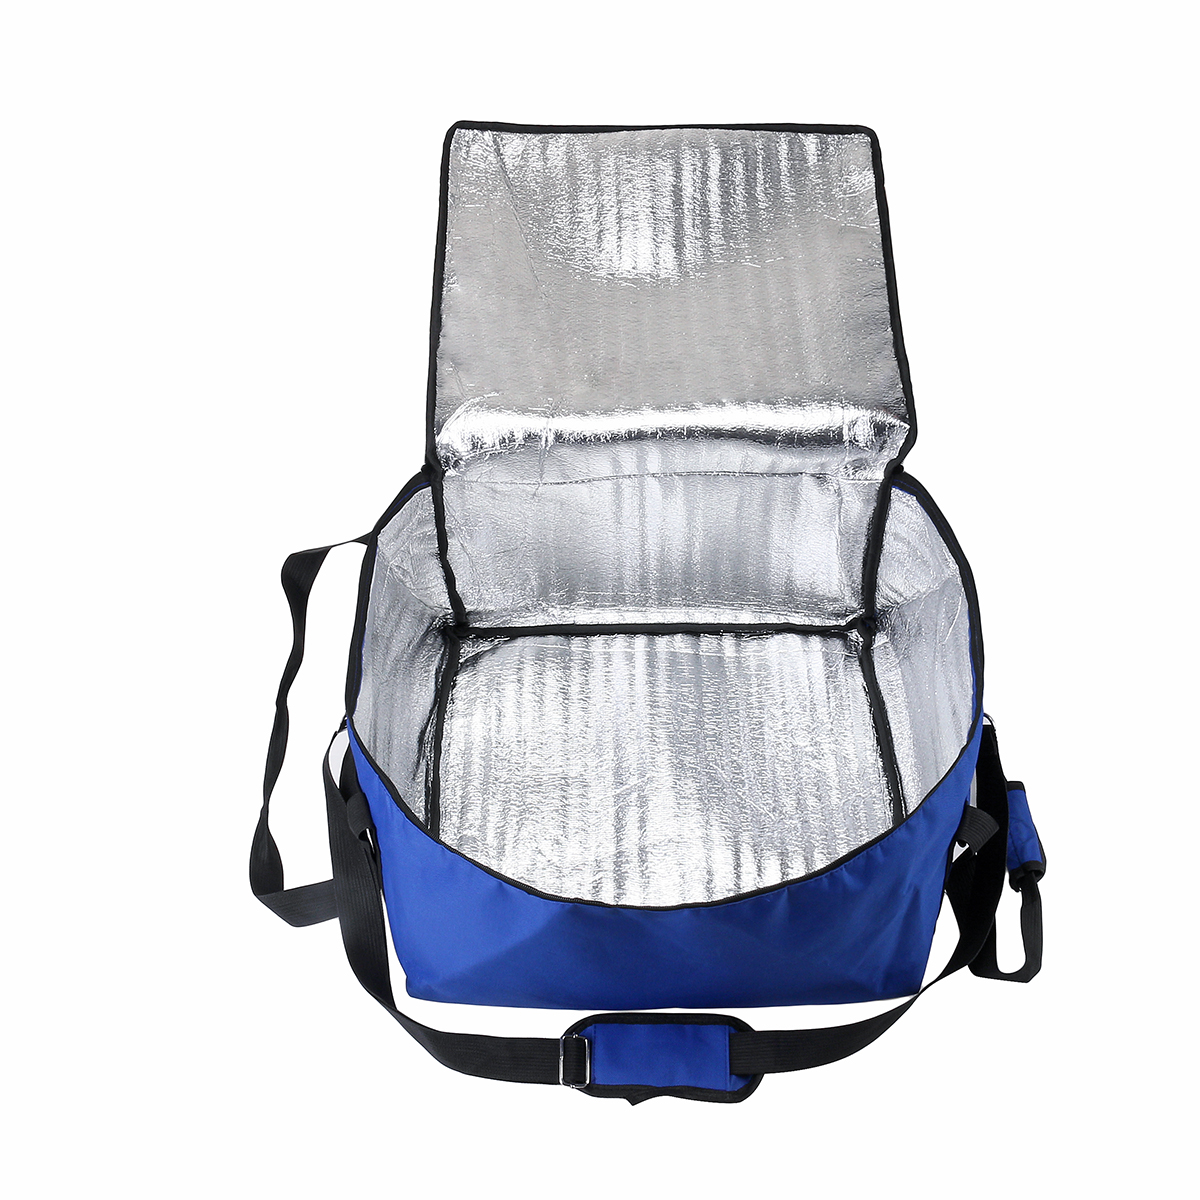 16inch-Camping-BBQ-Pizza-Delivery-Bag-Food-Insulated-Storage-Bag-Picnic-Bag-Lunch-Bag-1637130-1